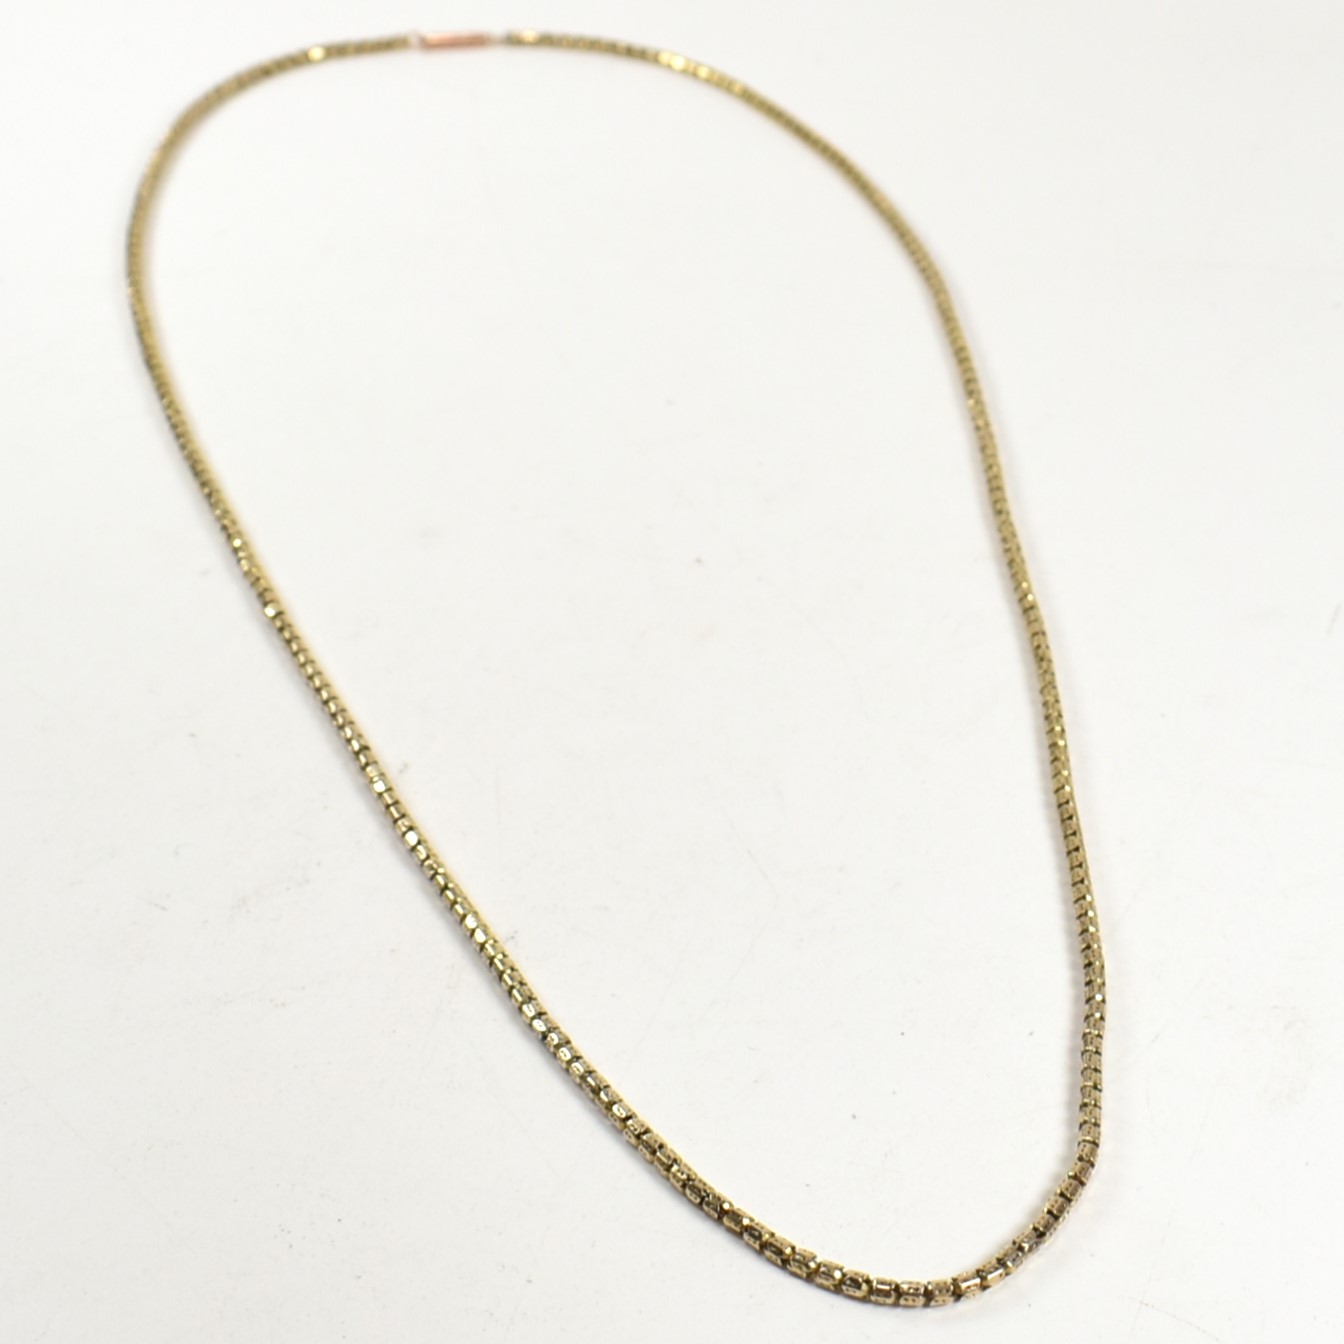 9CT GOLD FANCY LINK CHAIN NECKLACE - Image 5 of 5